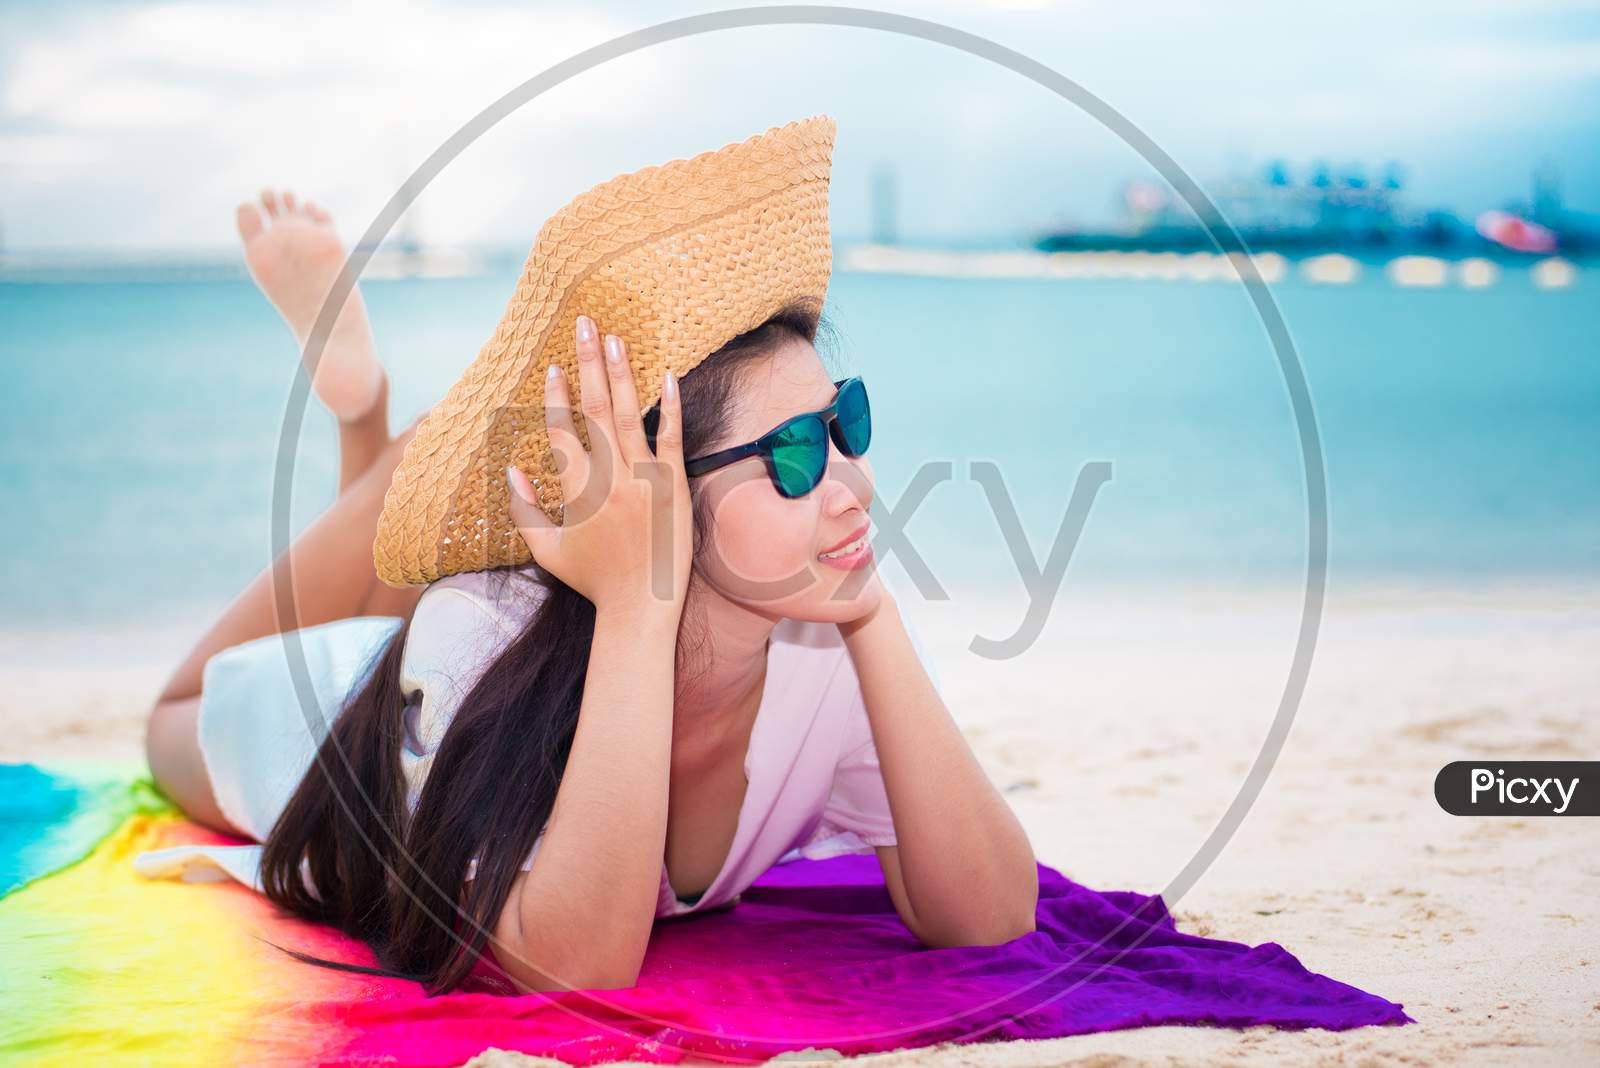 Asian Woman In Casual And Straw Hat Lying On Tropical Beach With Sea Background. Relax And Lifestyle Concept. Holiday And Vacation Concept. Single Woman And Happiness Theme.